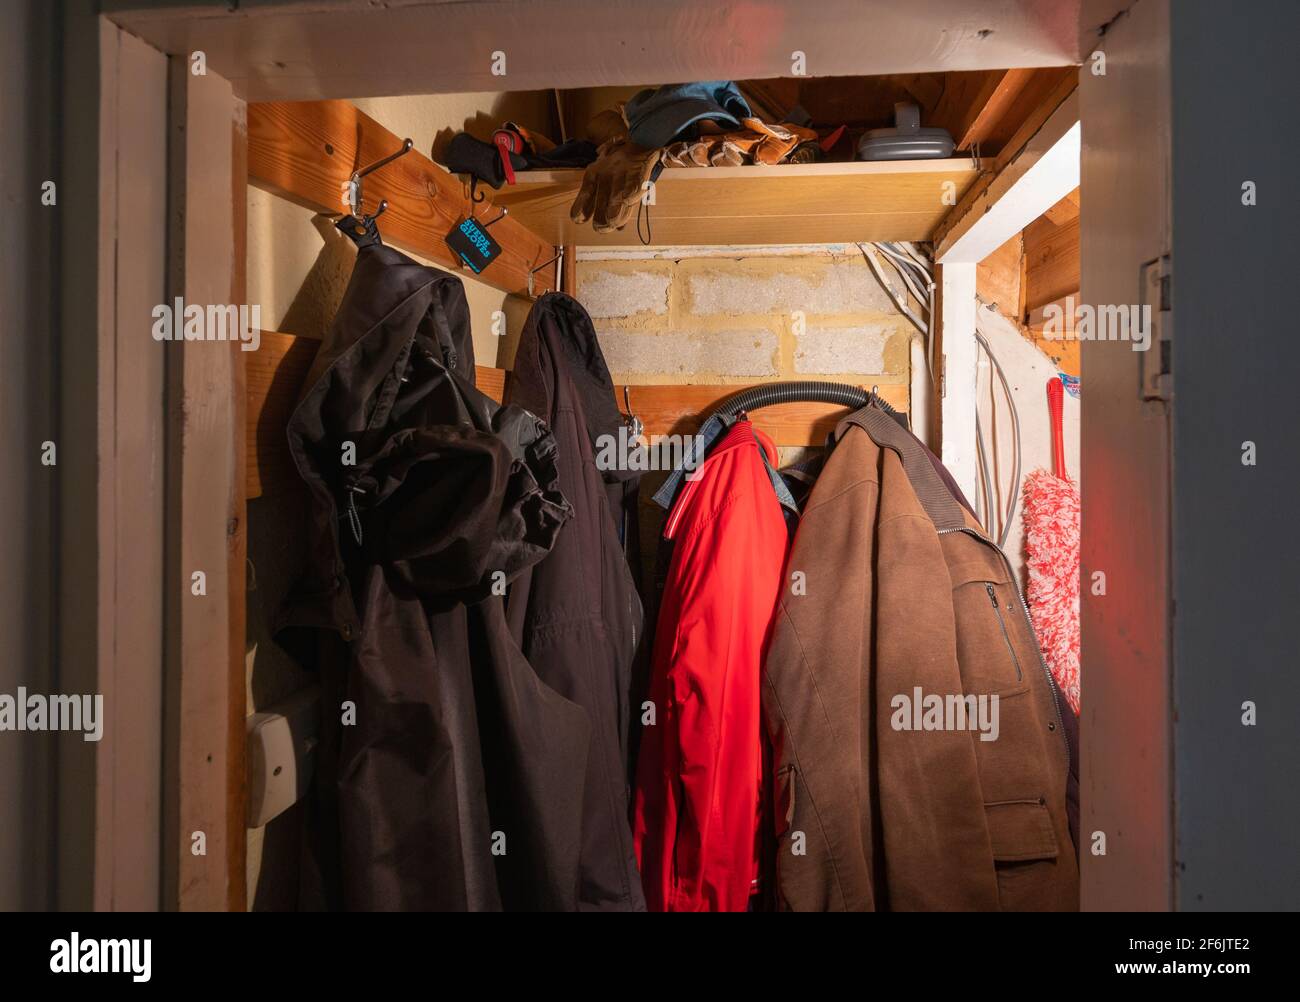 Coats hanging up in a small cupboard or closet under the stairs, where you can hang a coat and store other items, in a British home in England, UK. Stock Photo